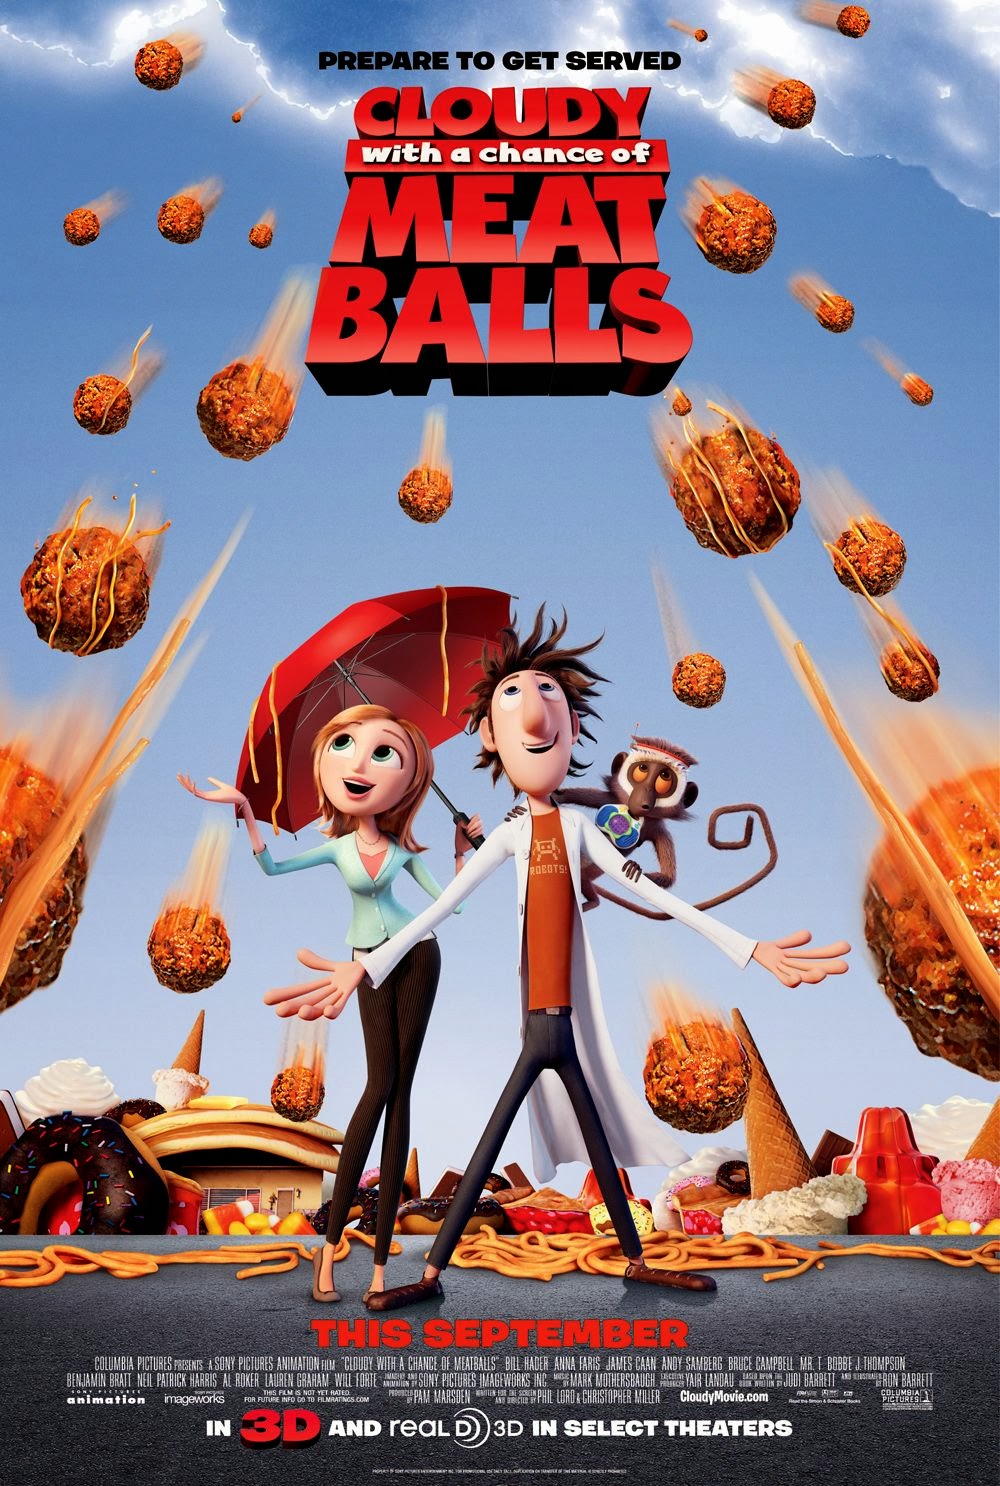 Watch Cloudy with a Chance of Meatballs 2 (2013) Movie Online Free - Watch Movies Online For Free - Cloudy With A Chance Of Meatballs 2 Full Movie Free